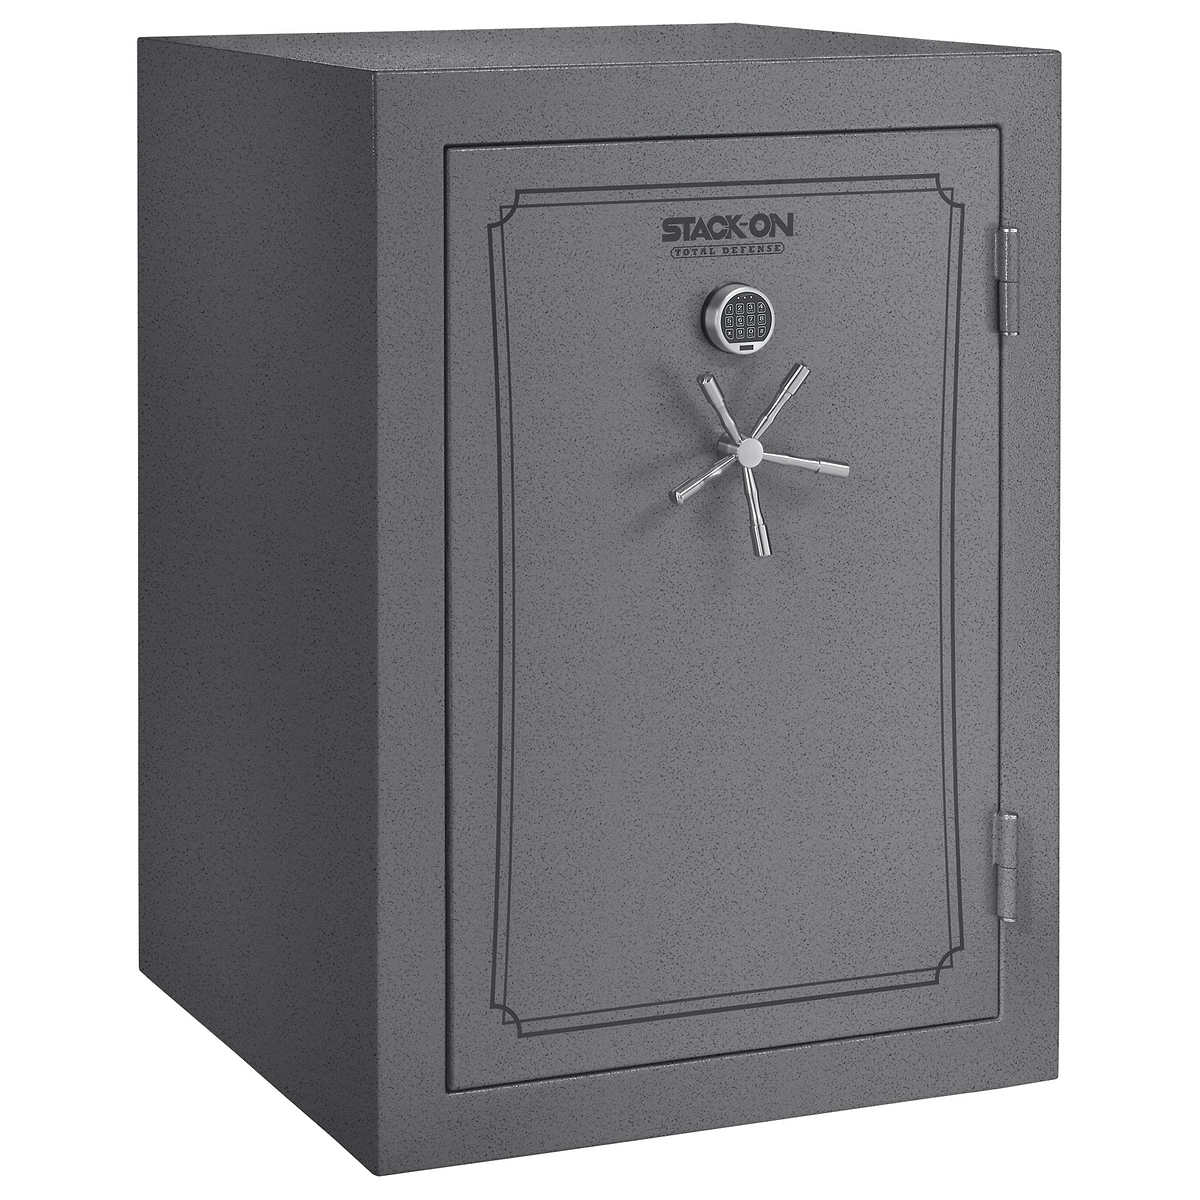 Stack On 29 32 Cu Ft Total Defense Fire Waterproof Executive Safe